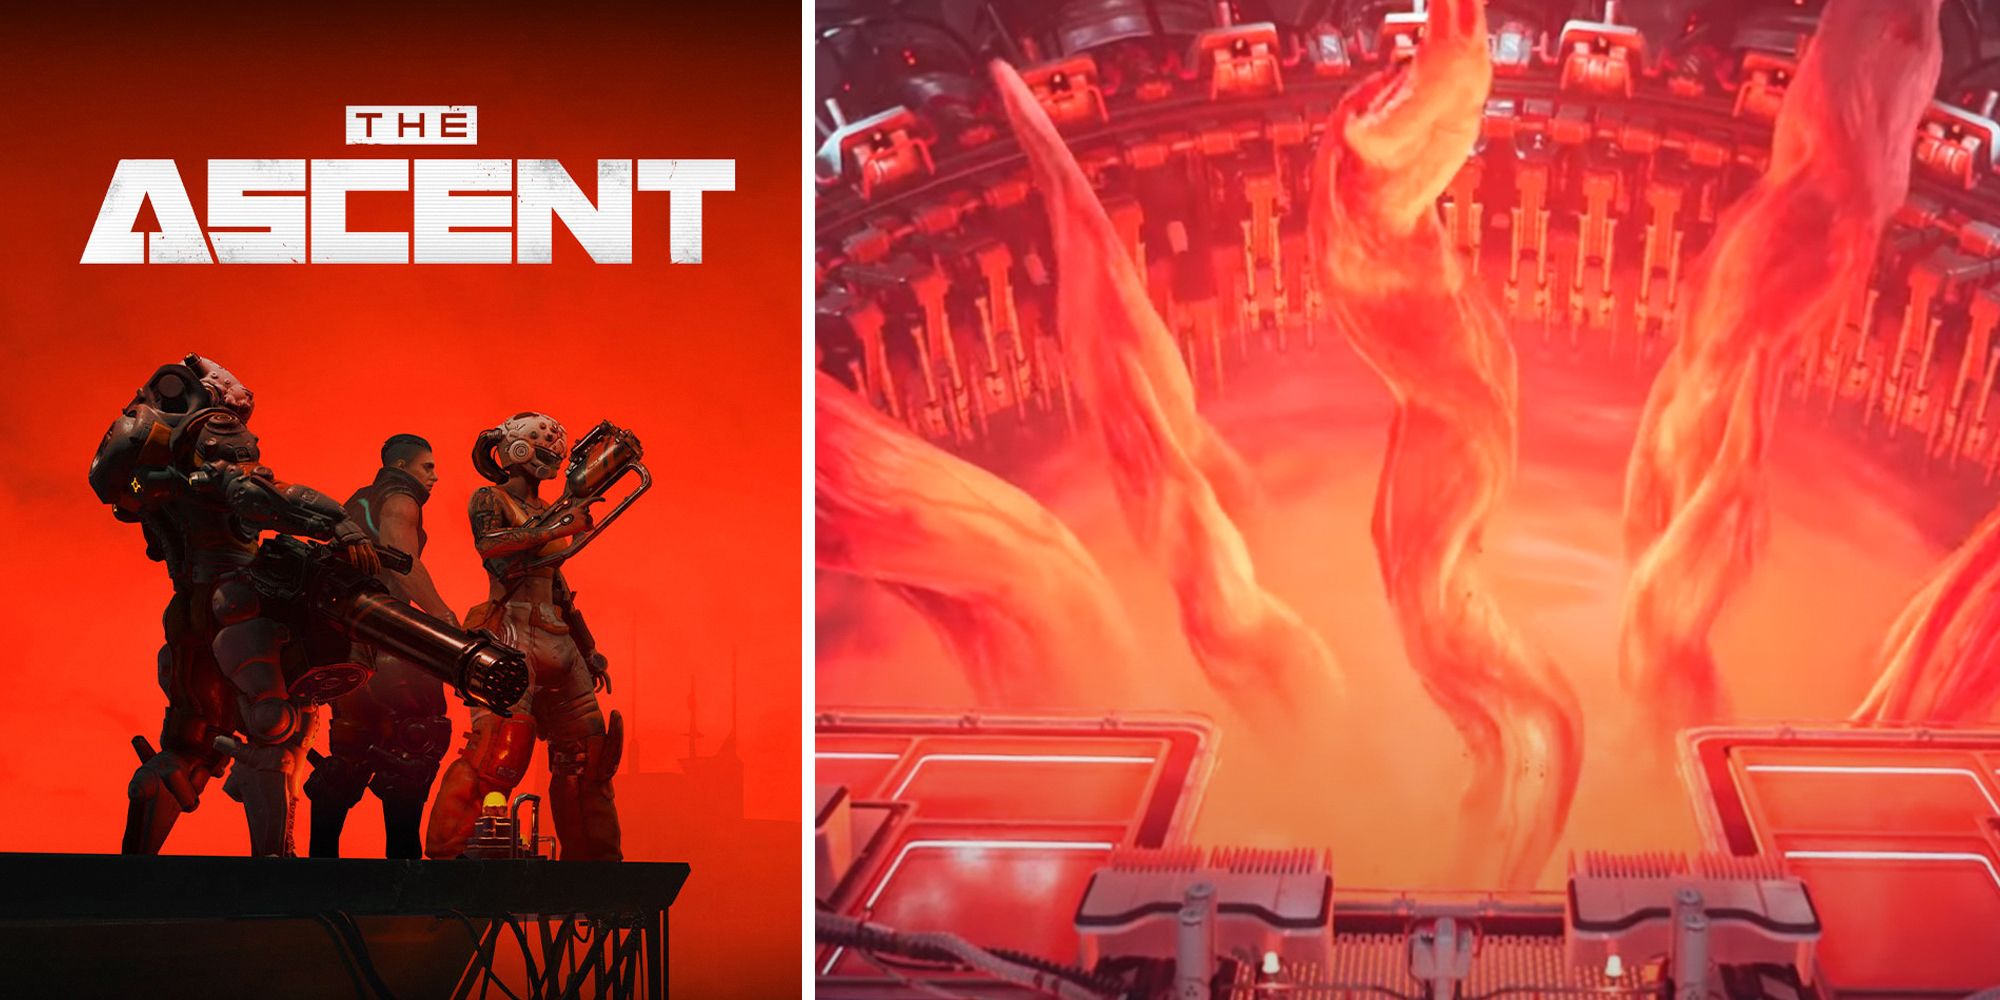 Split image of The Ascent. Promotional poster on the left, monster on the right. Both feature red lighting.